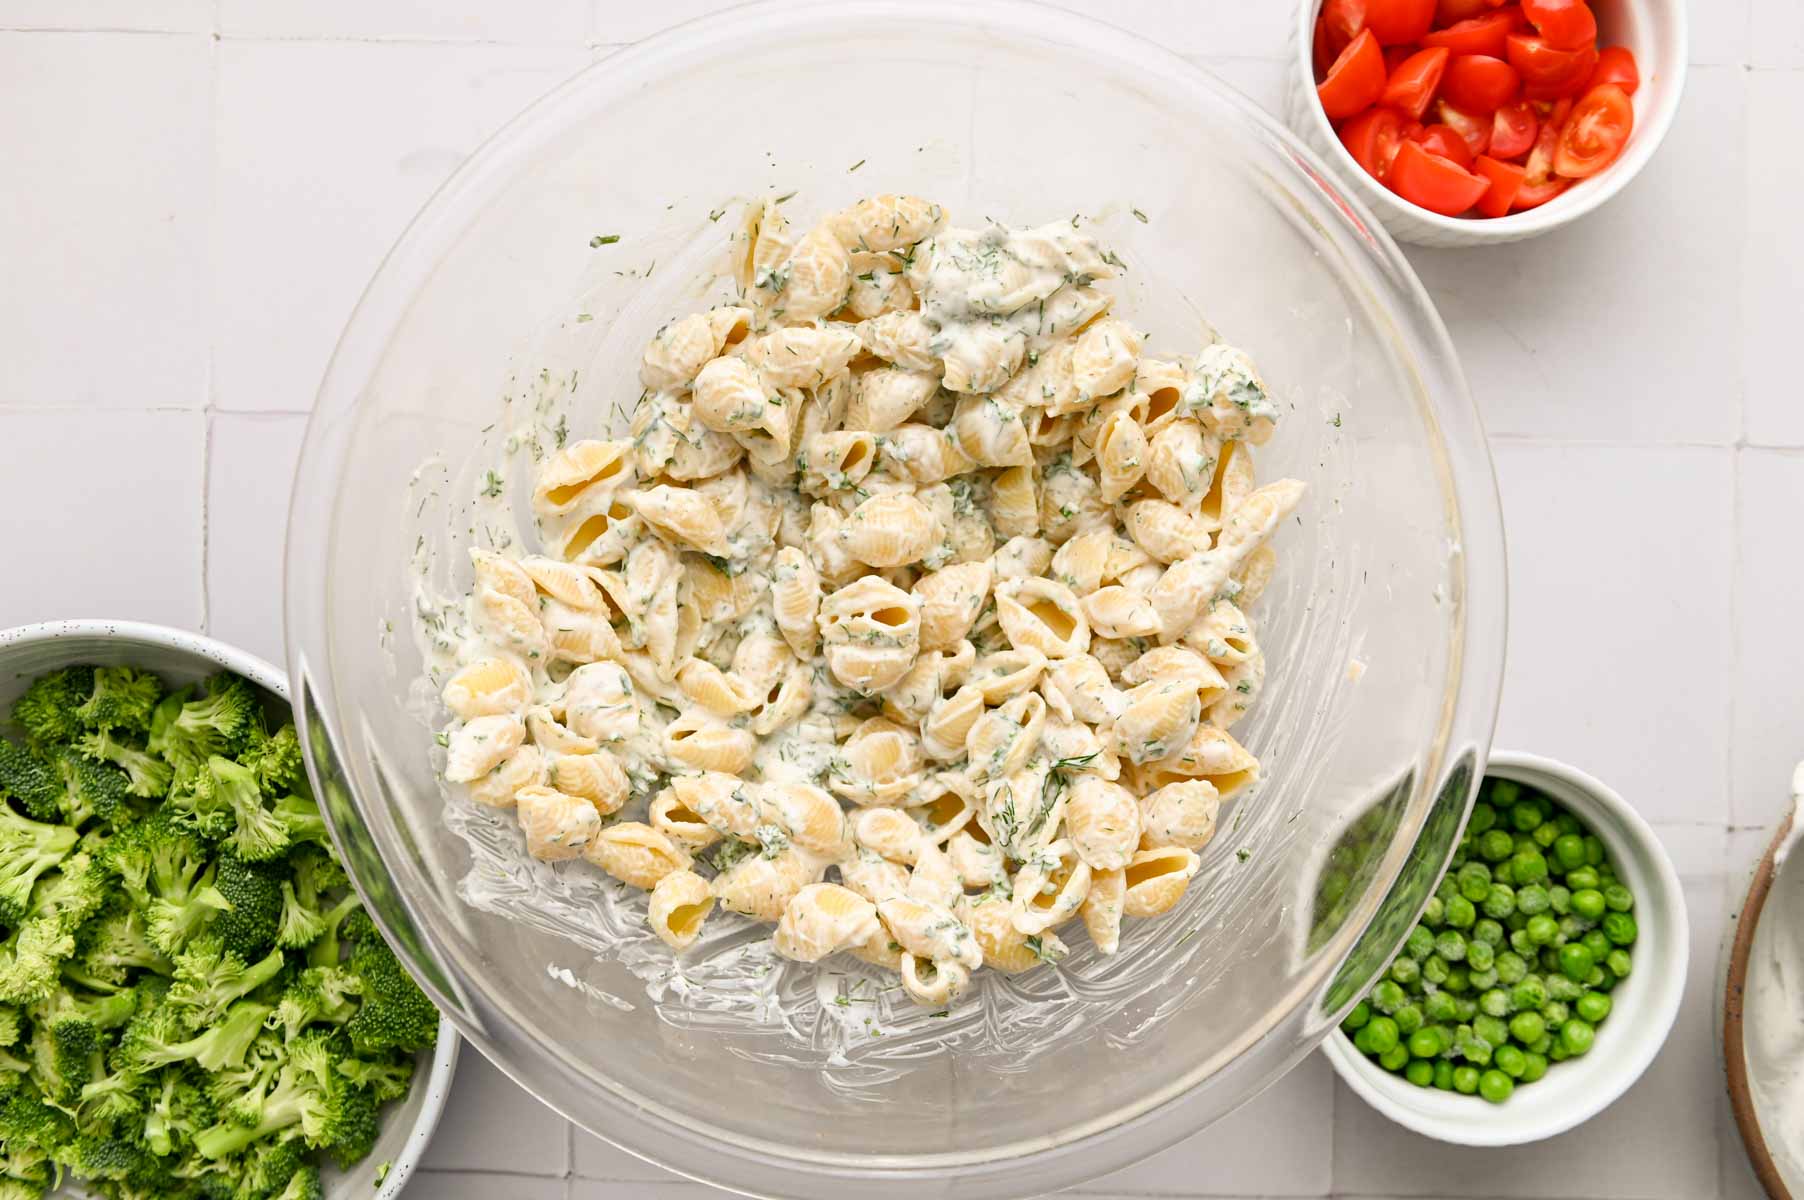 Pasta shells mixed with ranch dressing in a glass bowl.